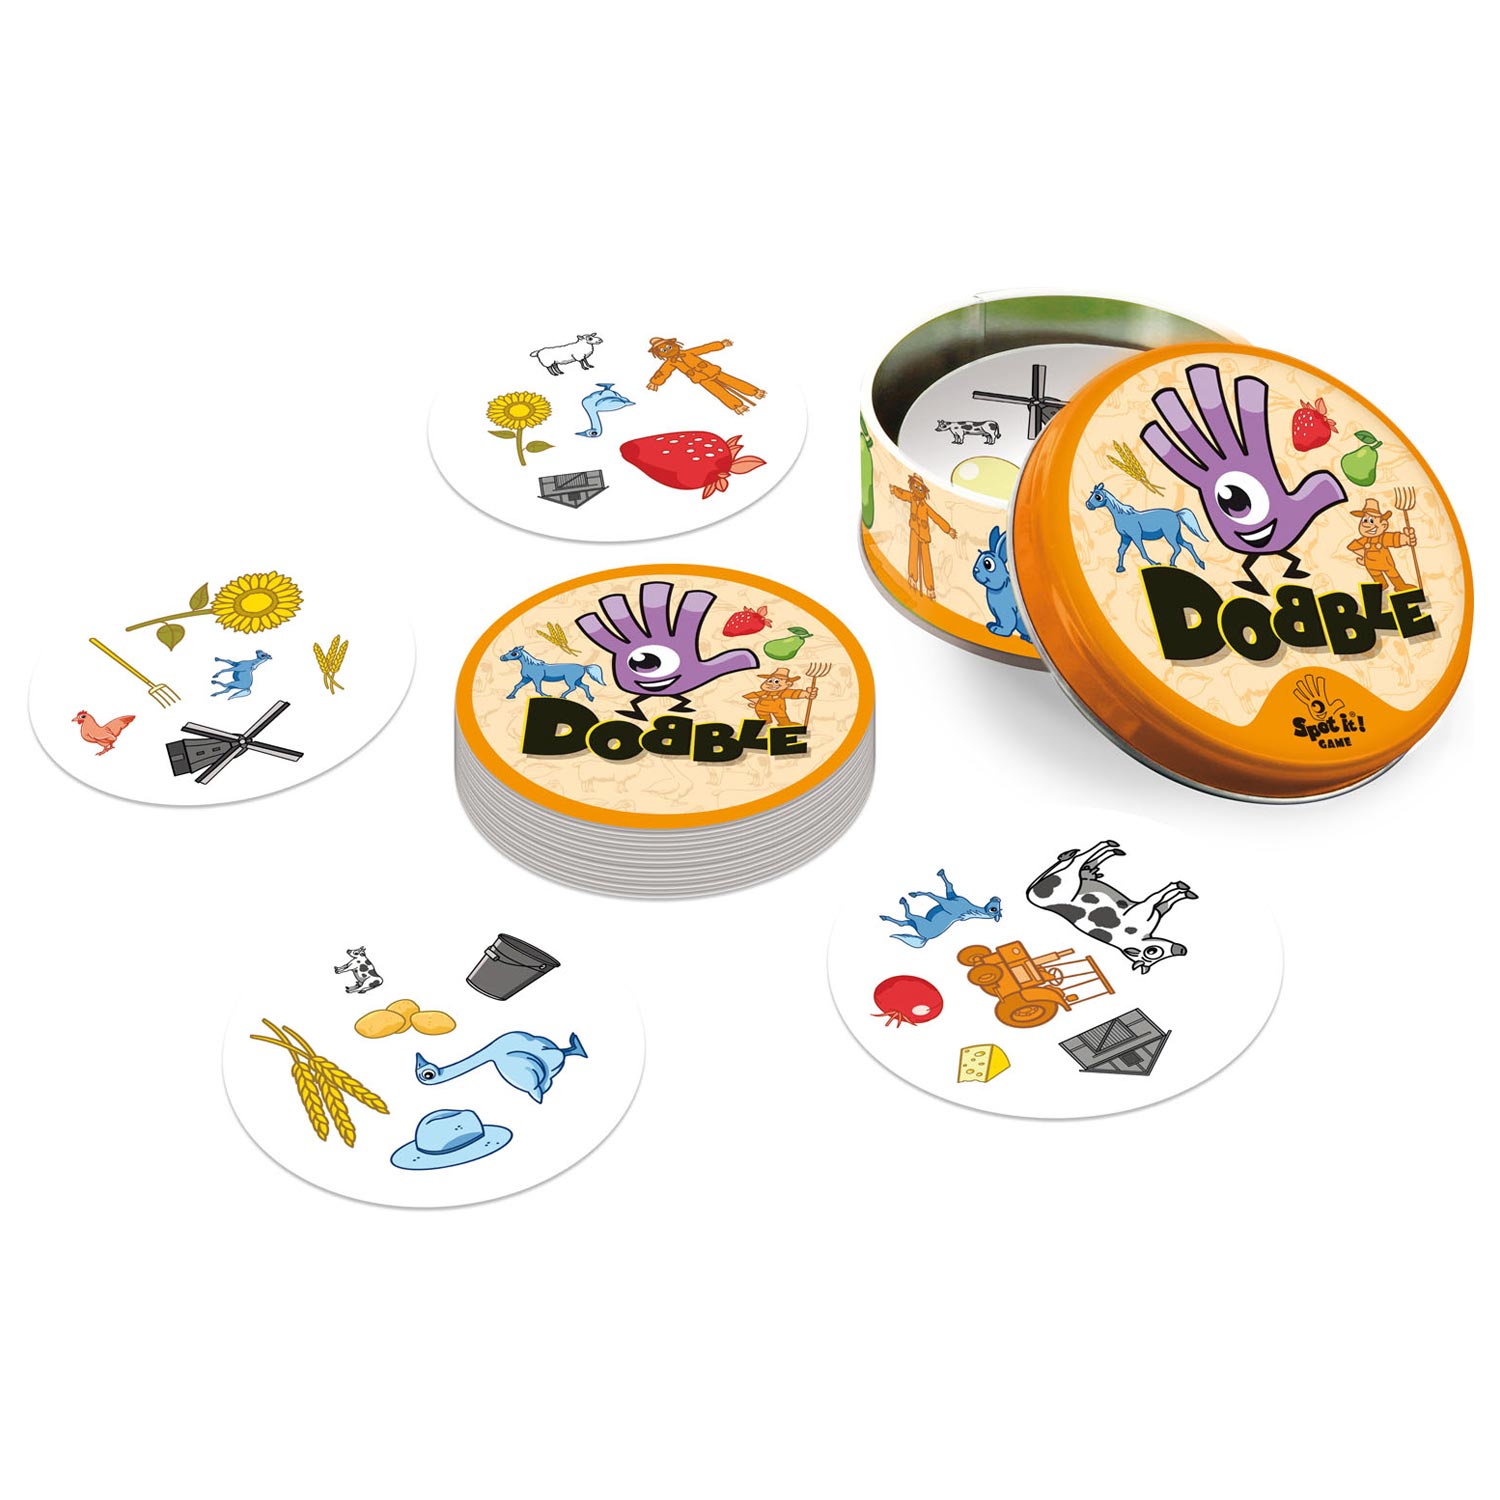 Buy Dobble, Trading cards and card games